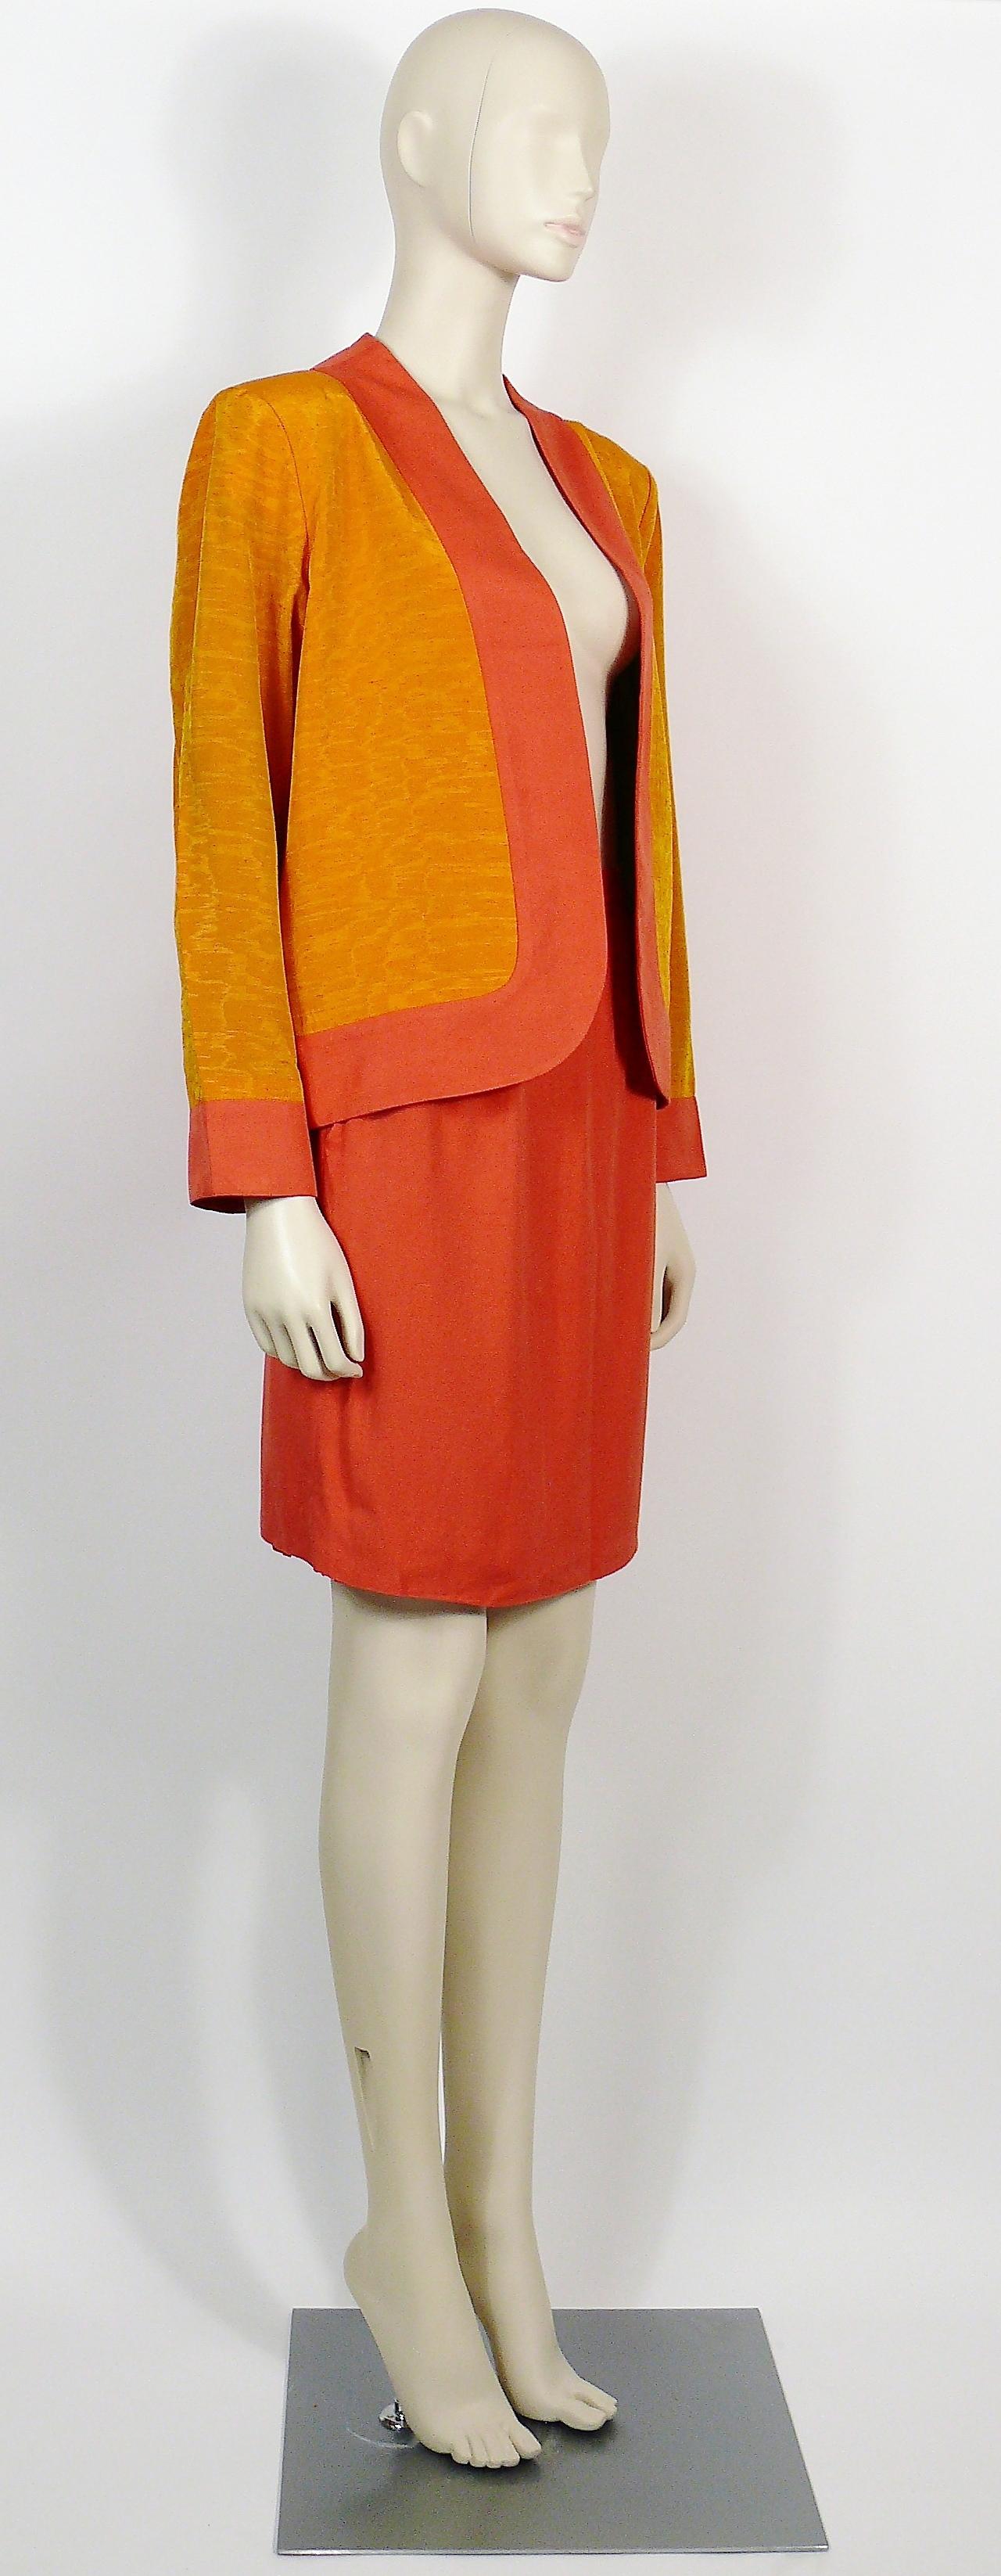 YVES SAINT LAURENT vintage oriental inspired jacket and skirt ensemble from the Spring/Summer Ready-to-Wear 1993 Collection.

JACKET features :
- Saffron color with orange trim collar and cuff.
- Long sleeves.
- Without buttons.
- Blue silk